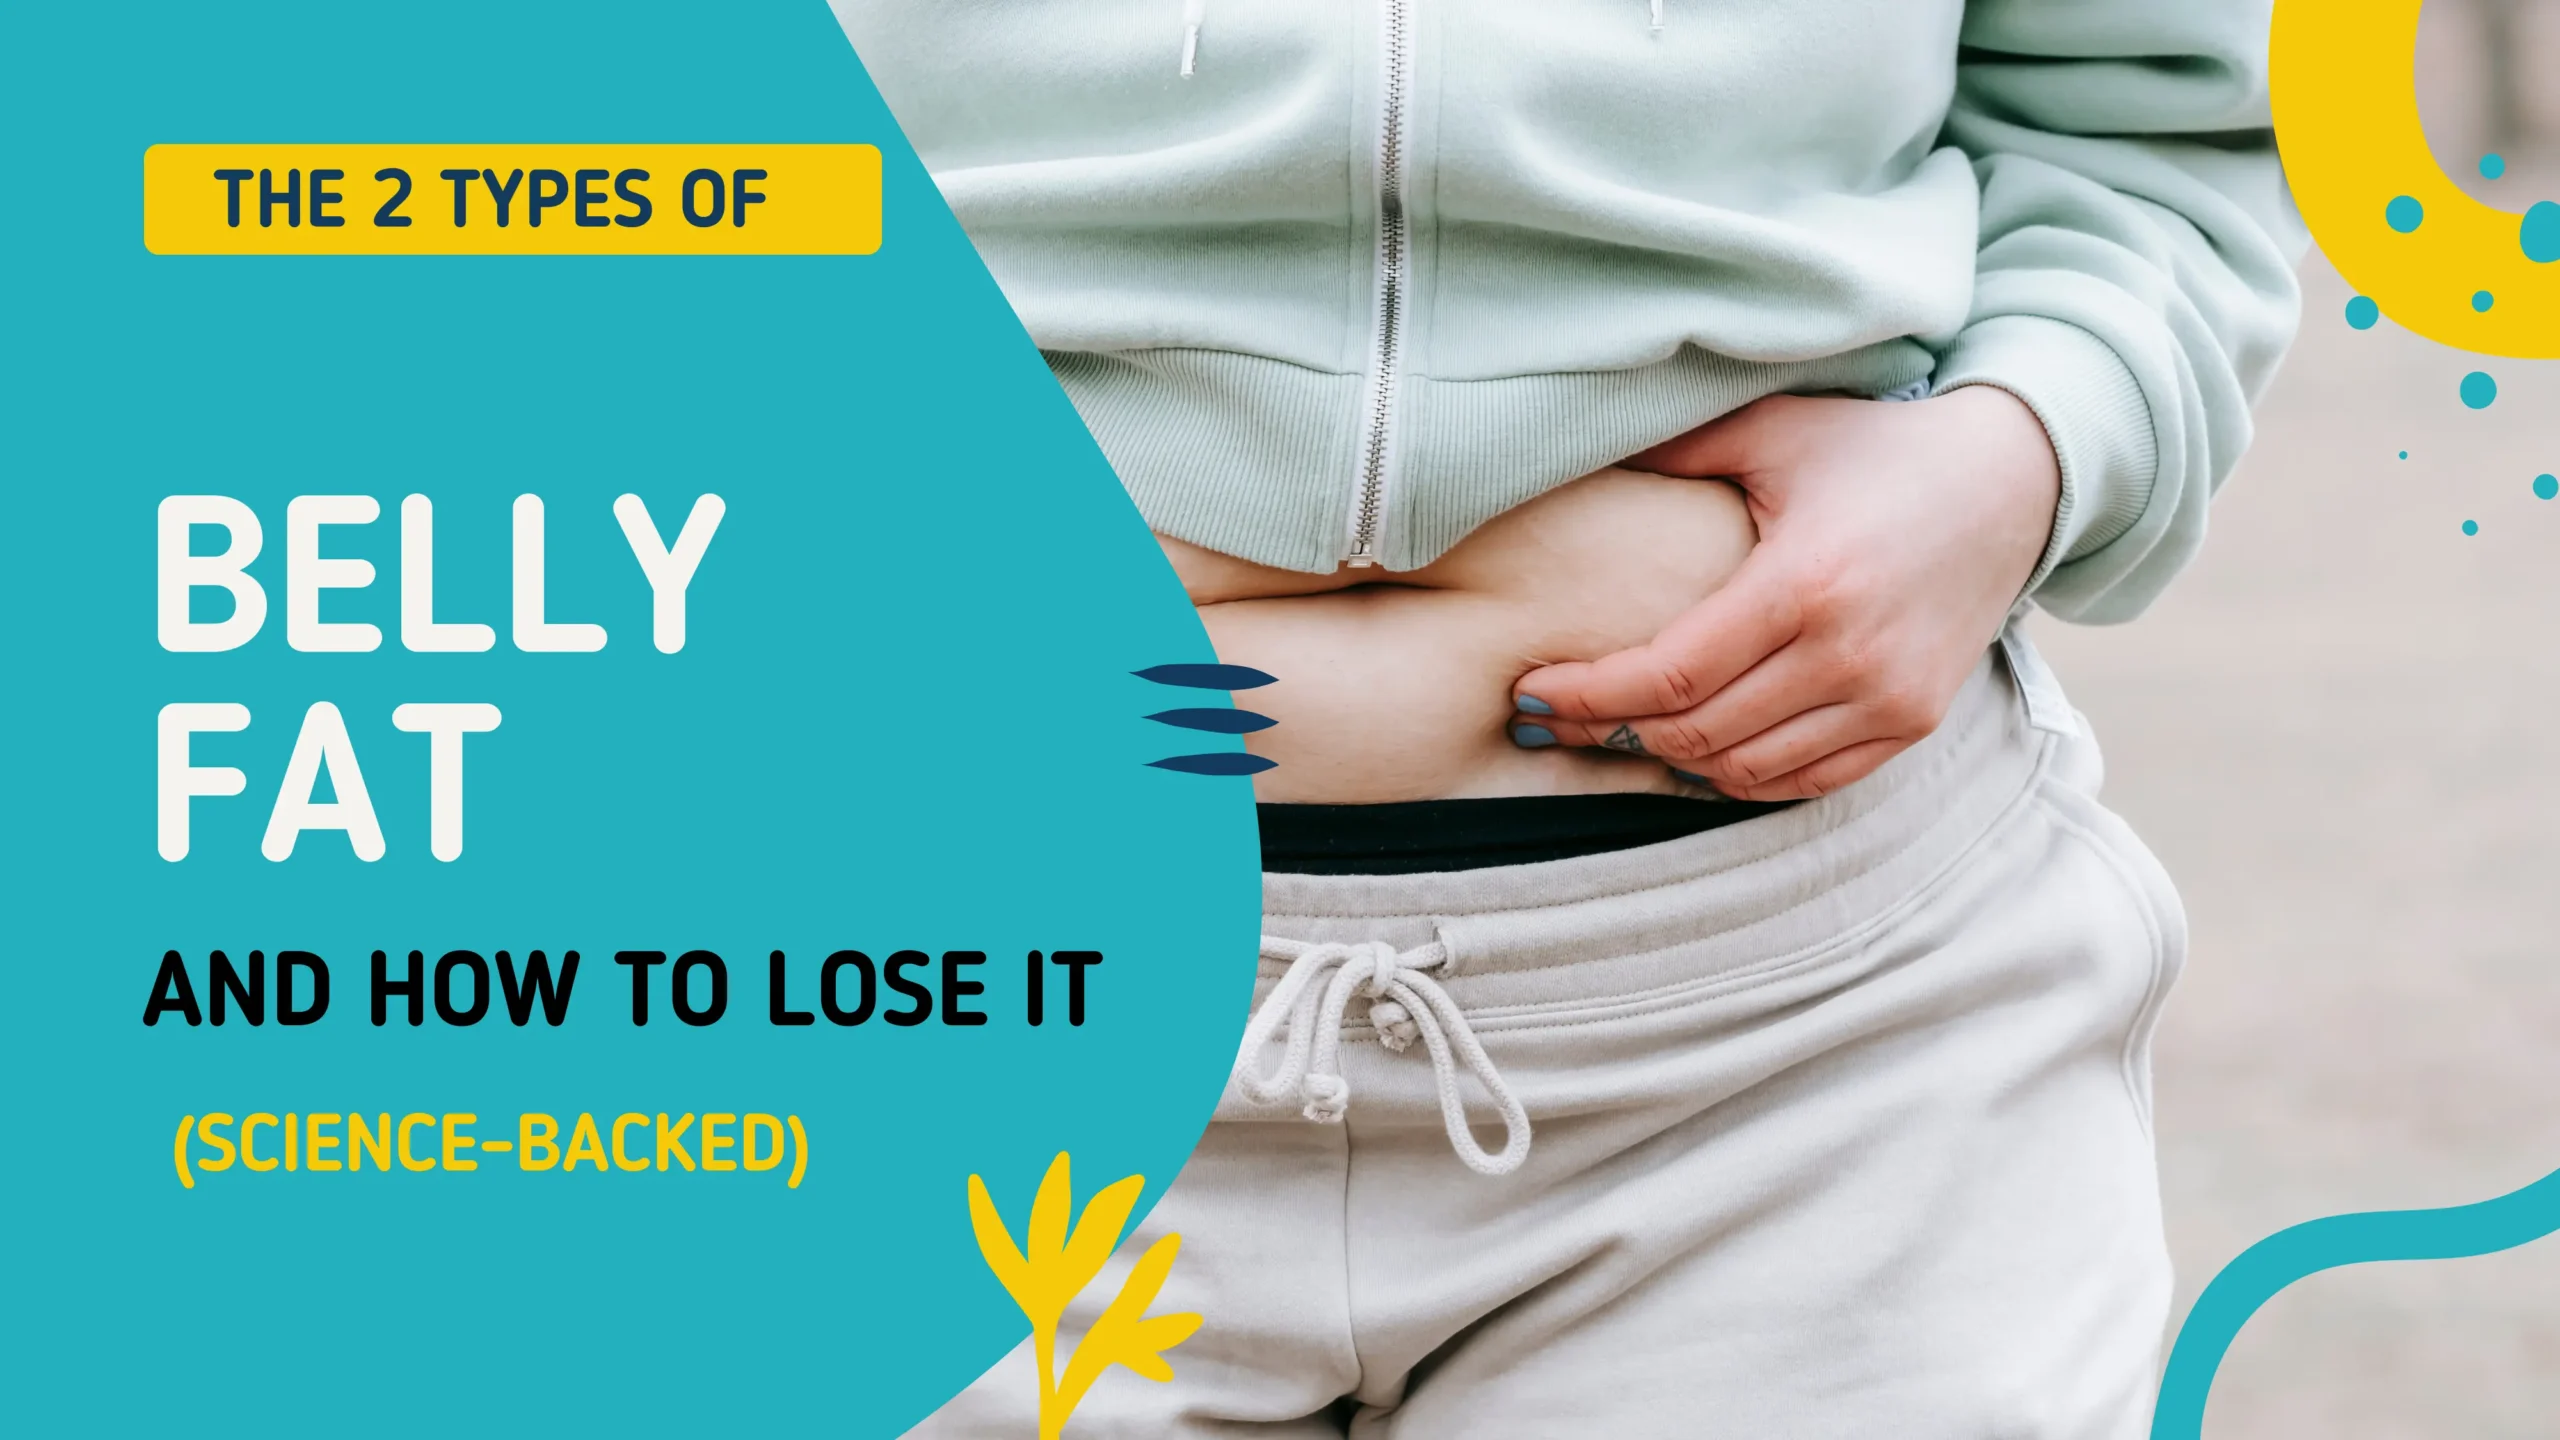 The 2 Types of Belly Fat and How to Lose It (Science-backed)